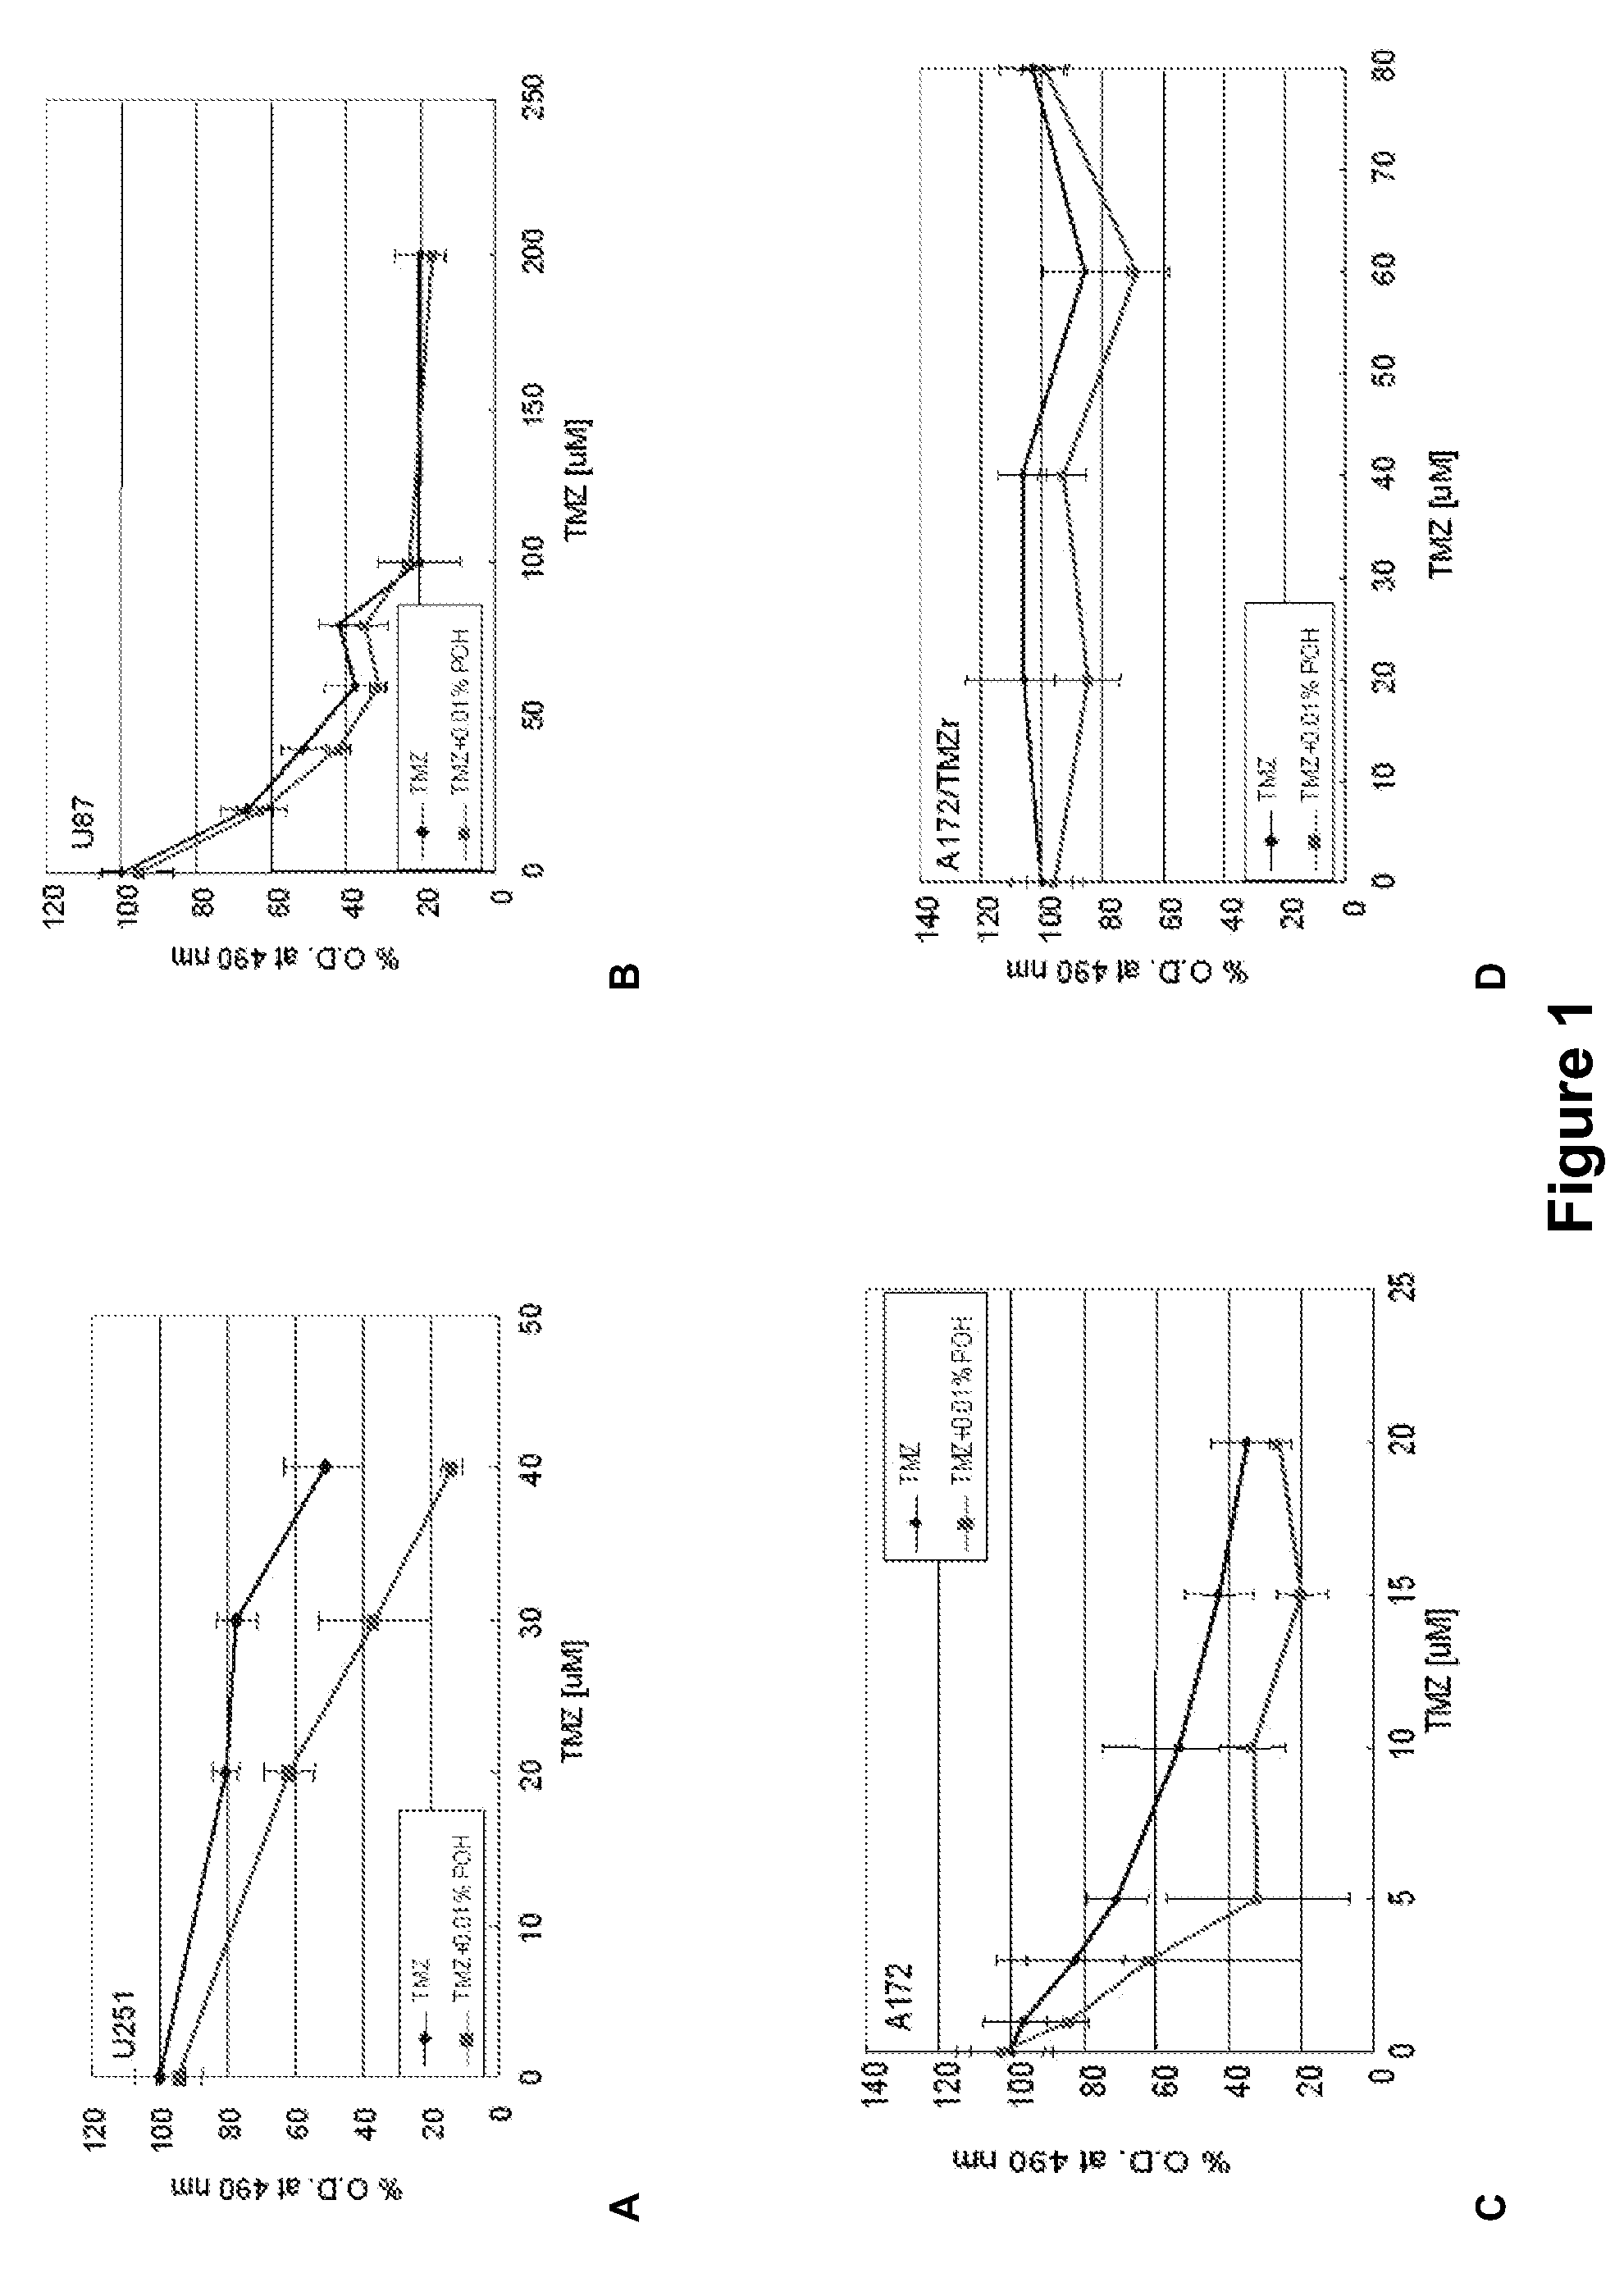 Therapeutic compositions comprising monoterpenes